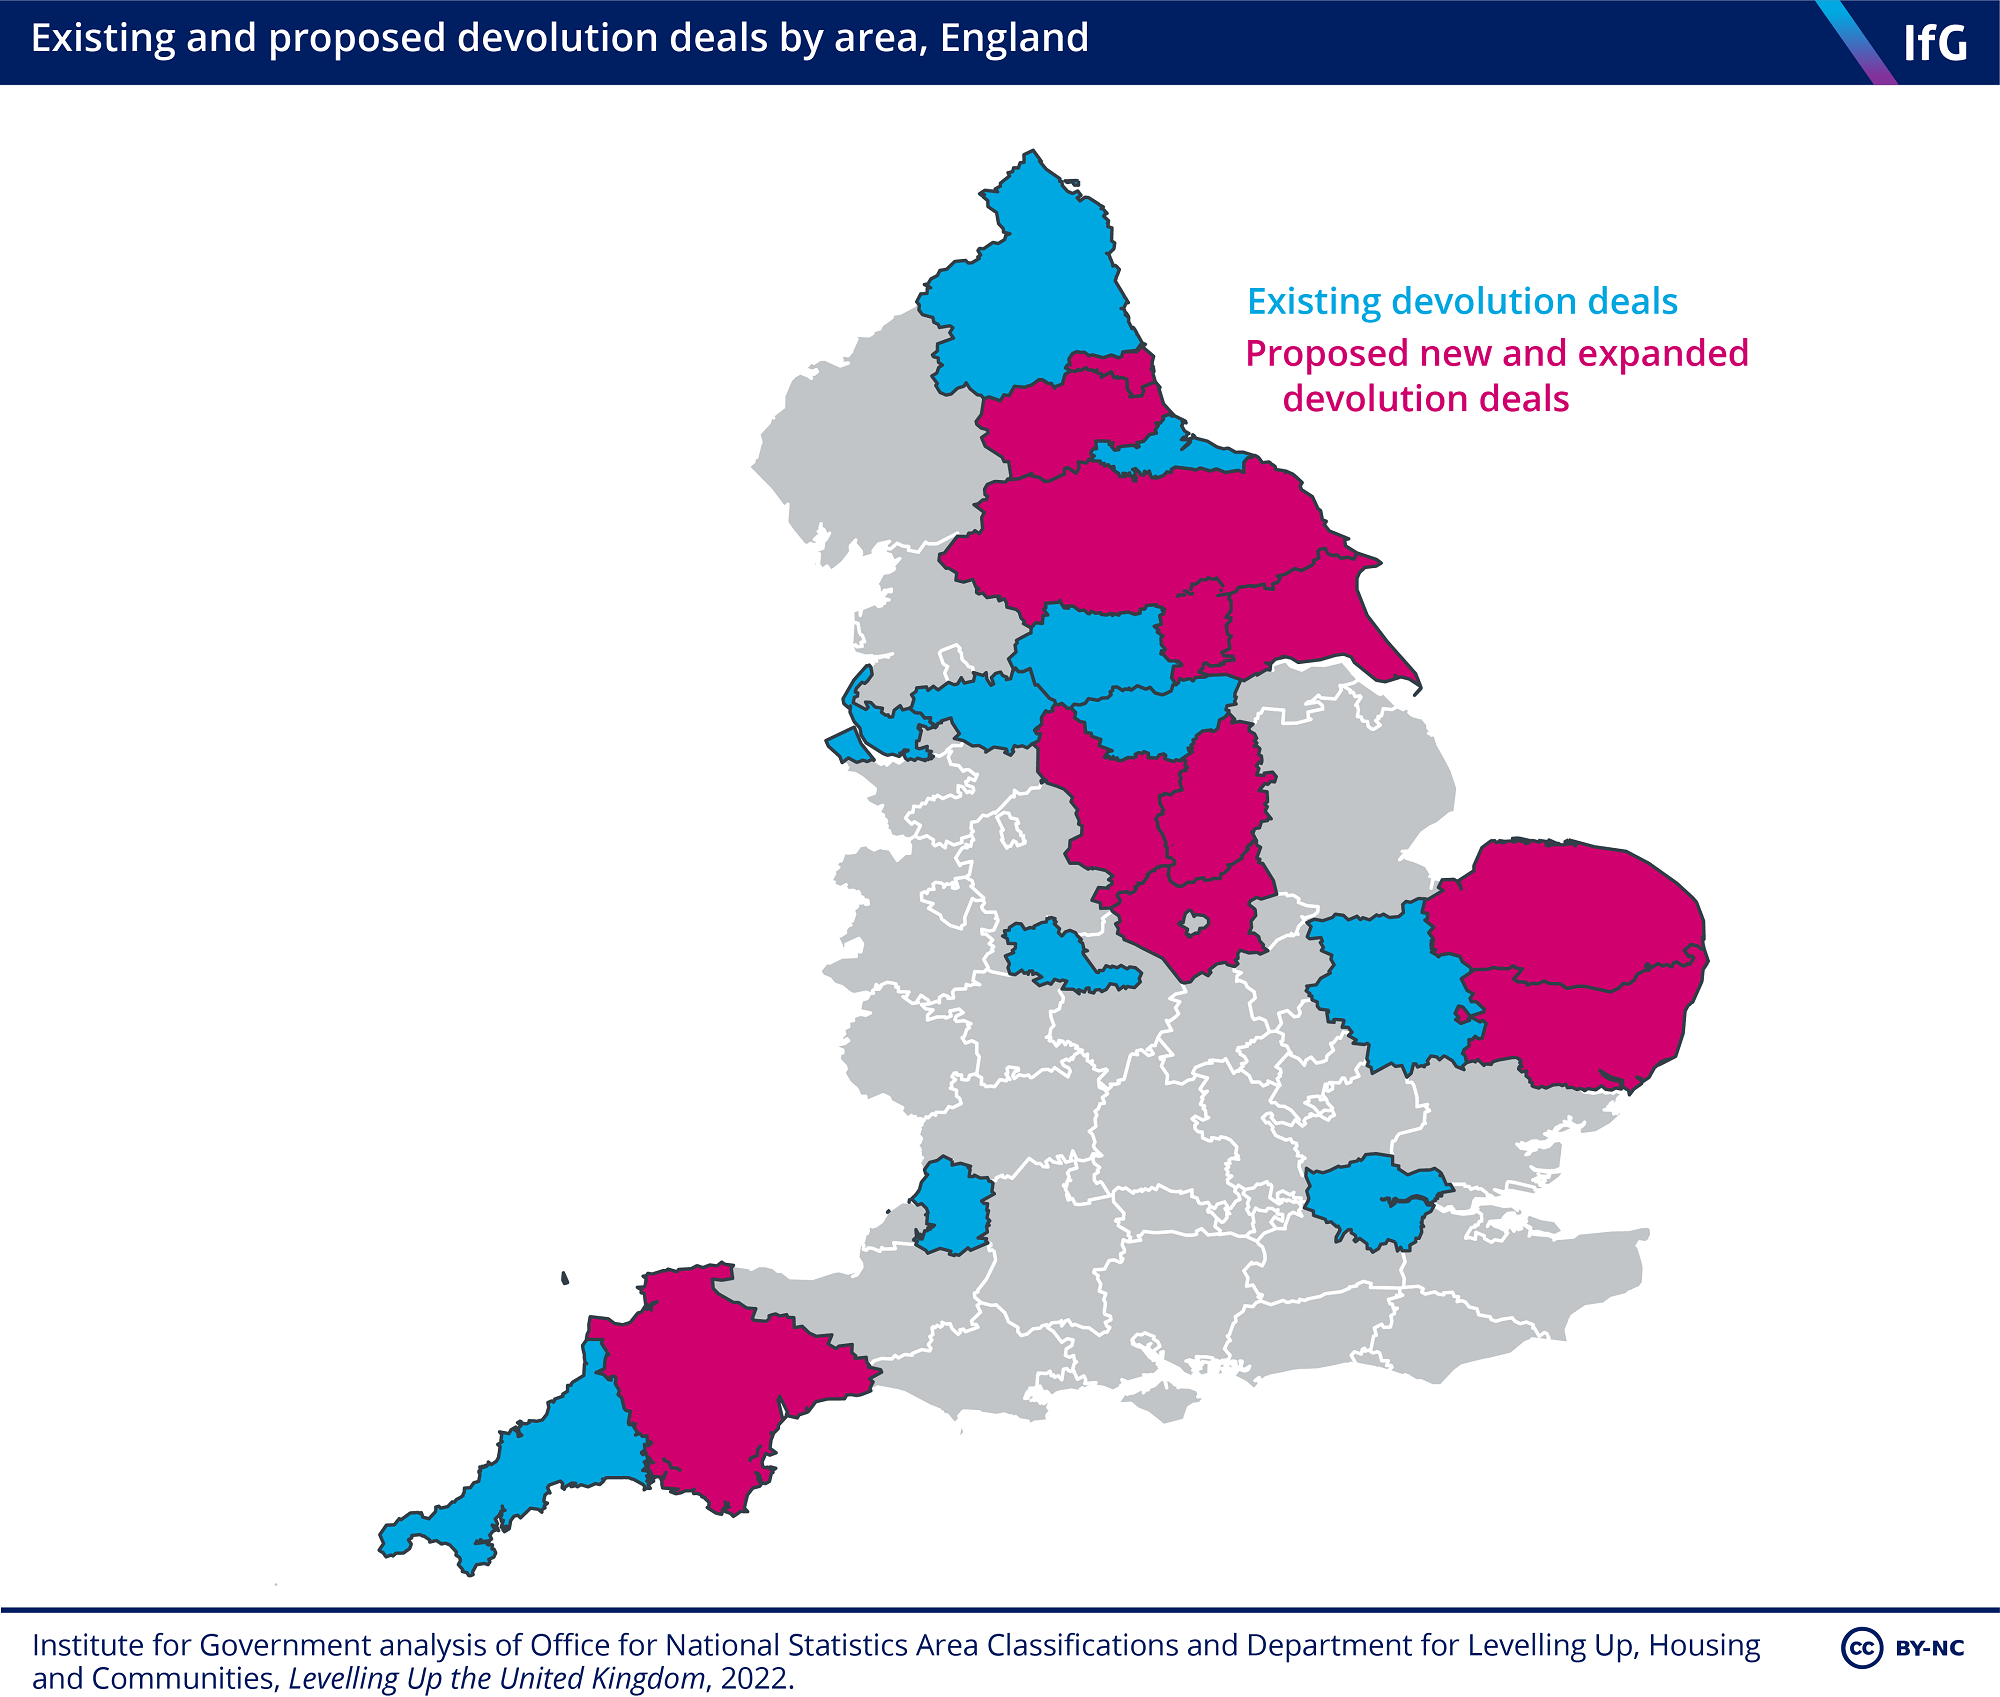 Existing and proposed devolution deals by area, England